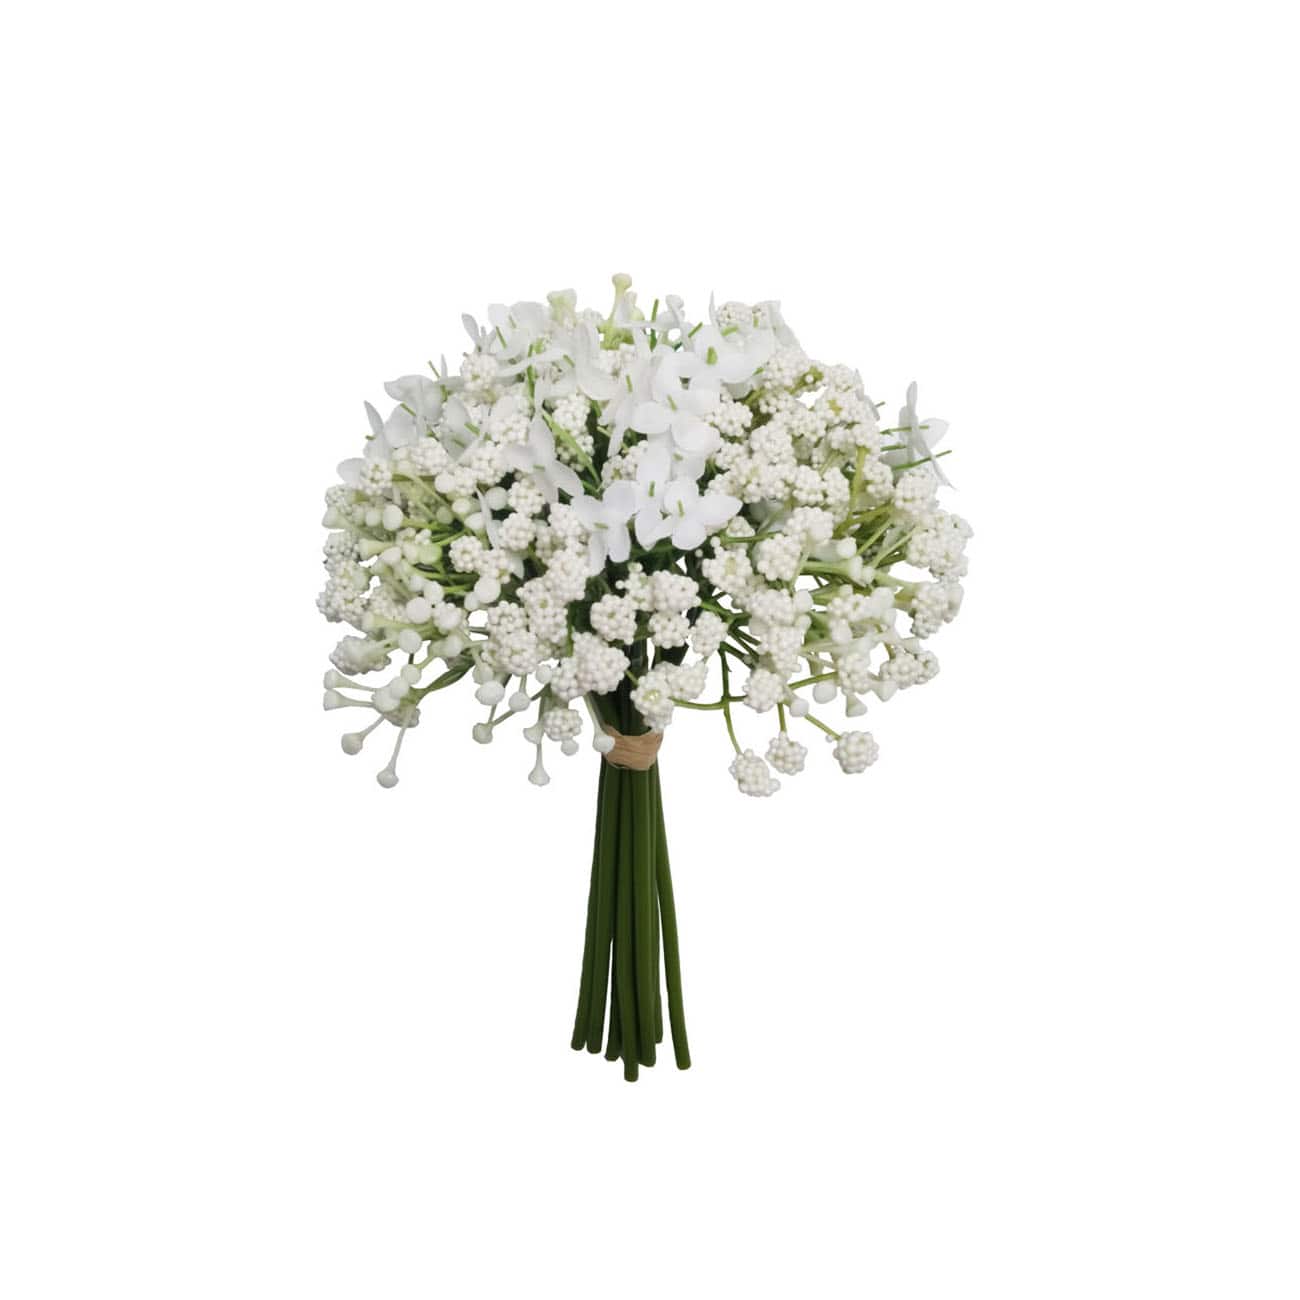 Mandy's 10pcs White Babys Breath Artificial Flowers Fake Flowers Bulk of babysbreath for Home Wedding Party Decoration